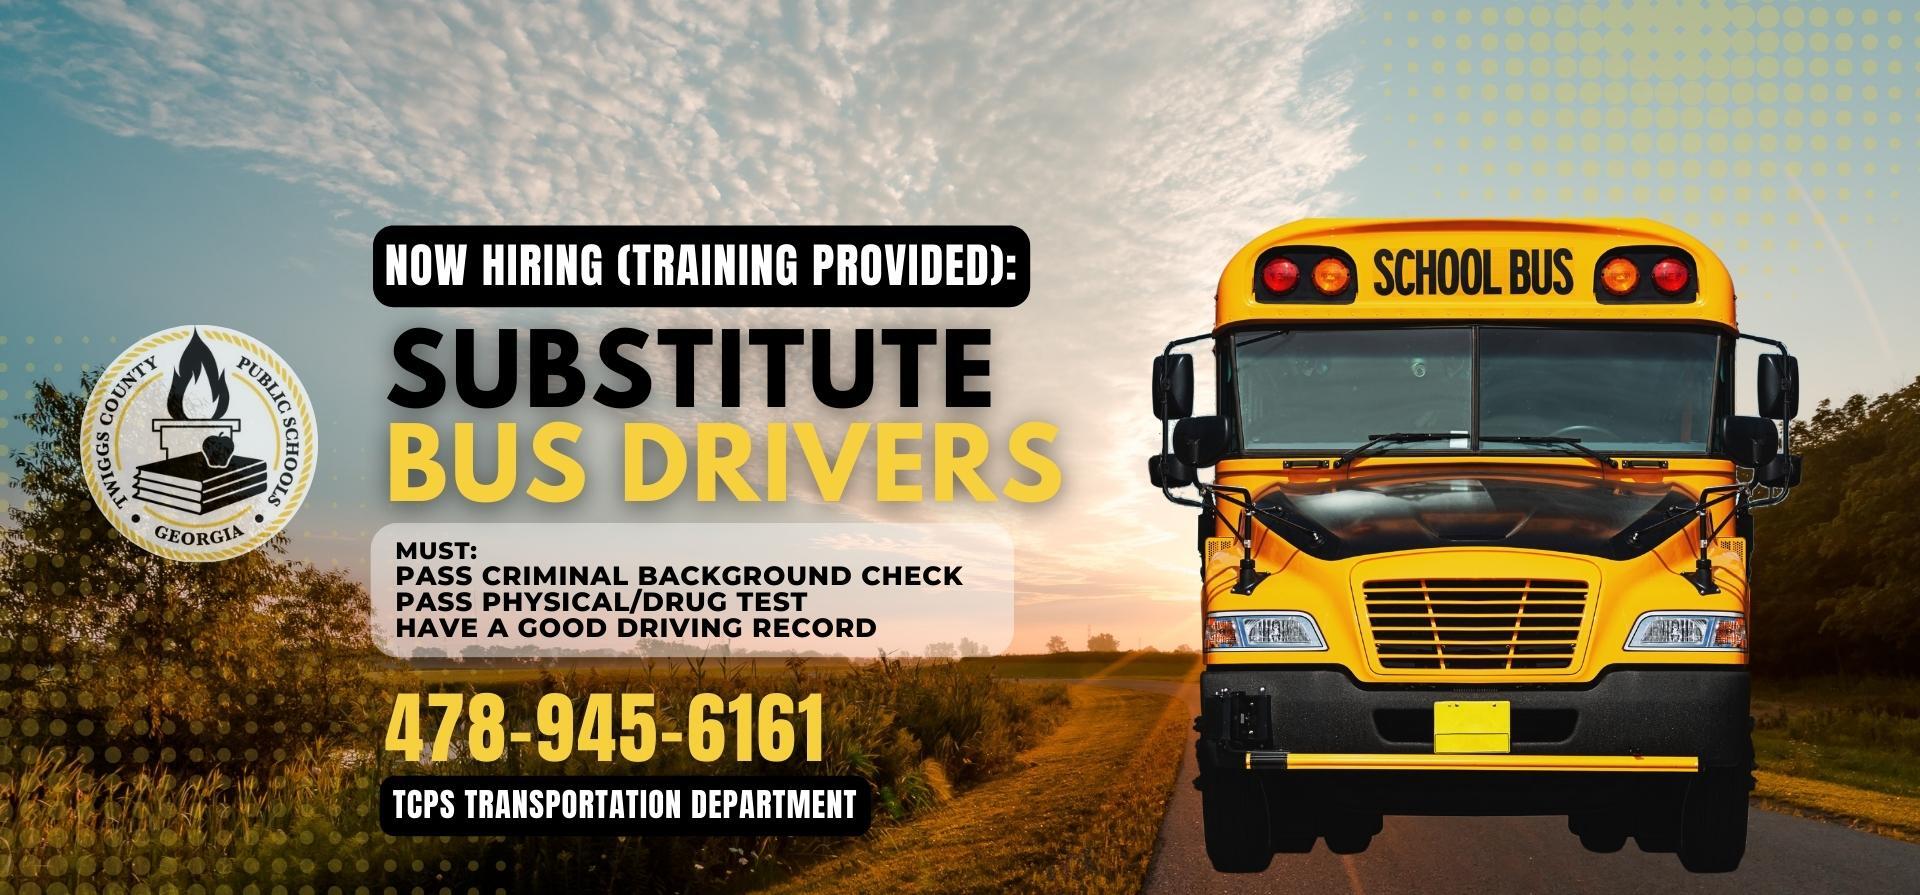 Join our family as a Bus Driver